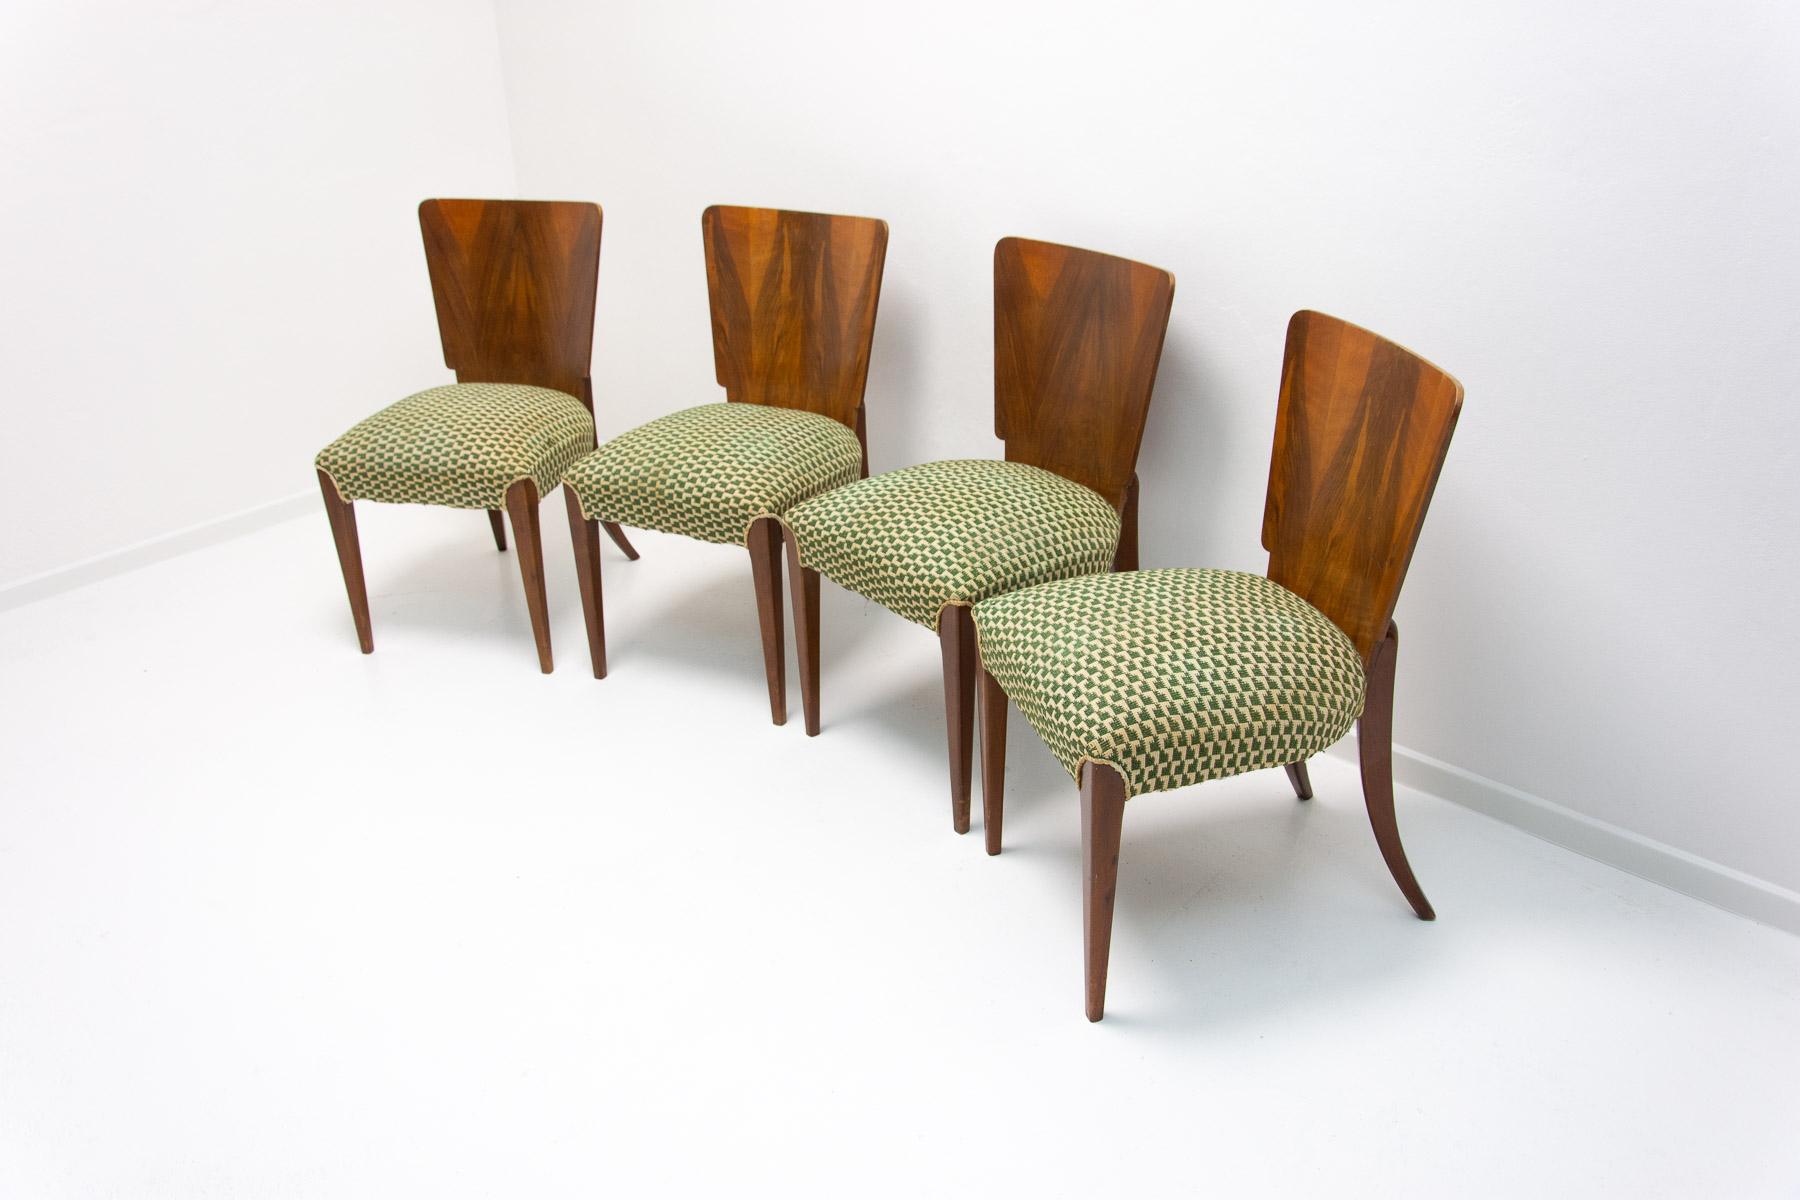 20th Century Art Deco Dining Chairs H-214 by Jindrich Halabala for Úp Závody, 1950s